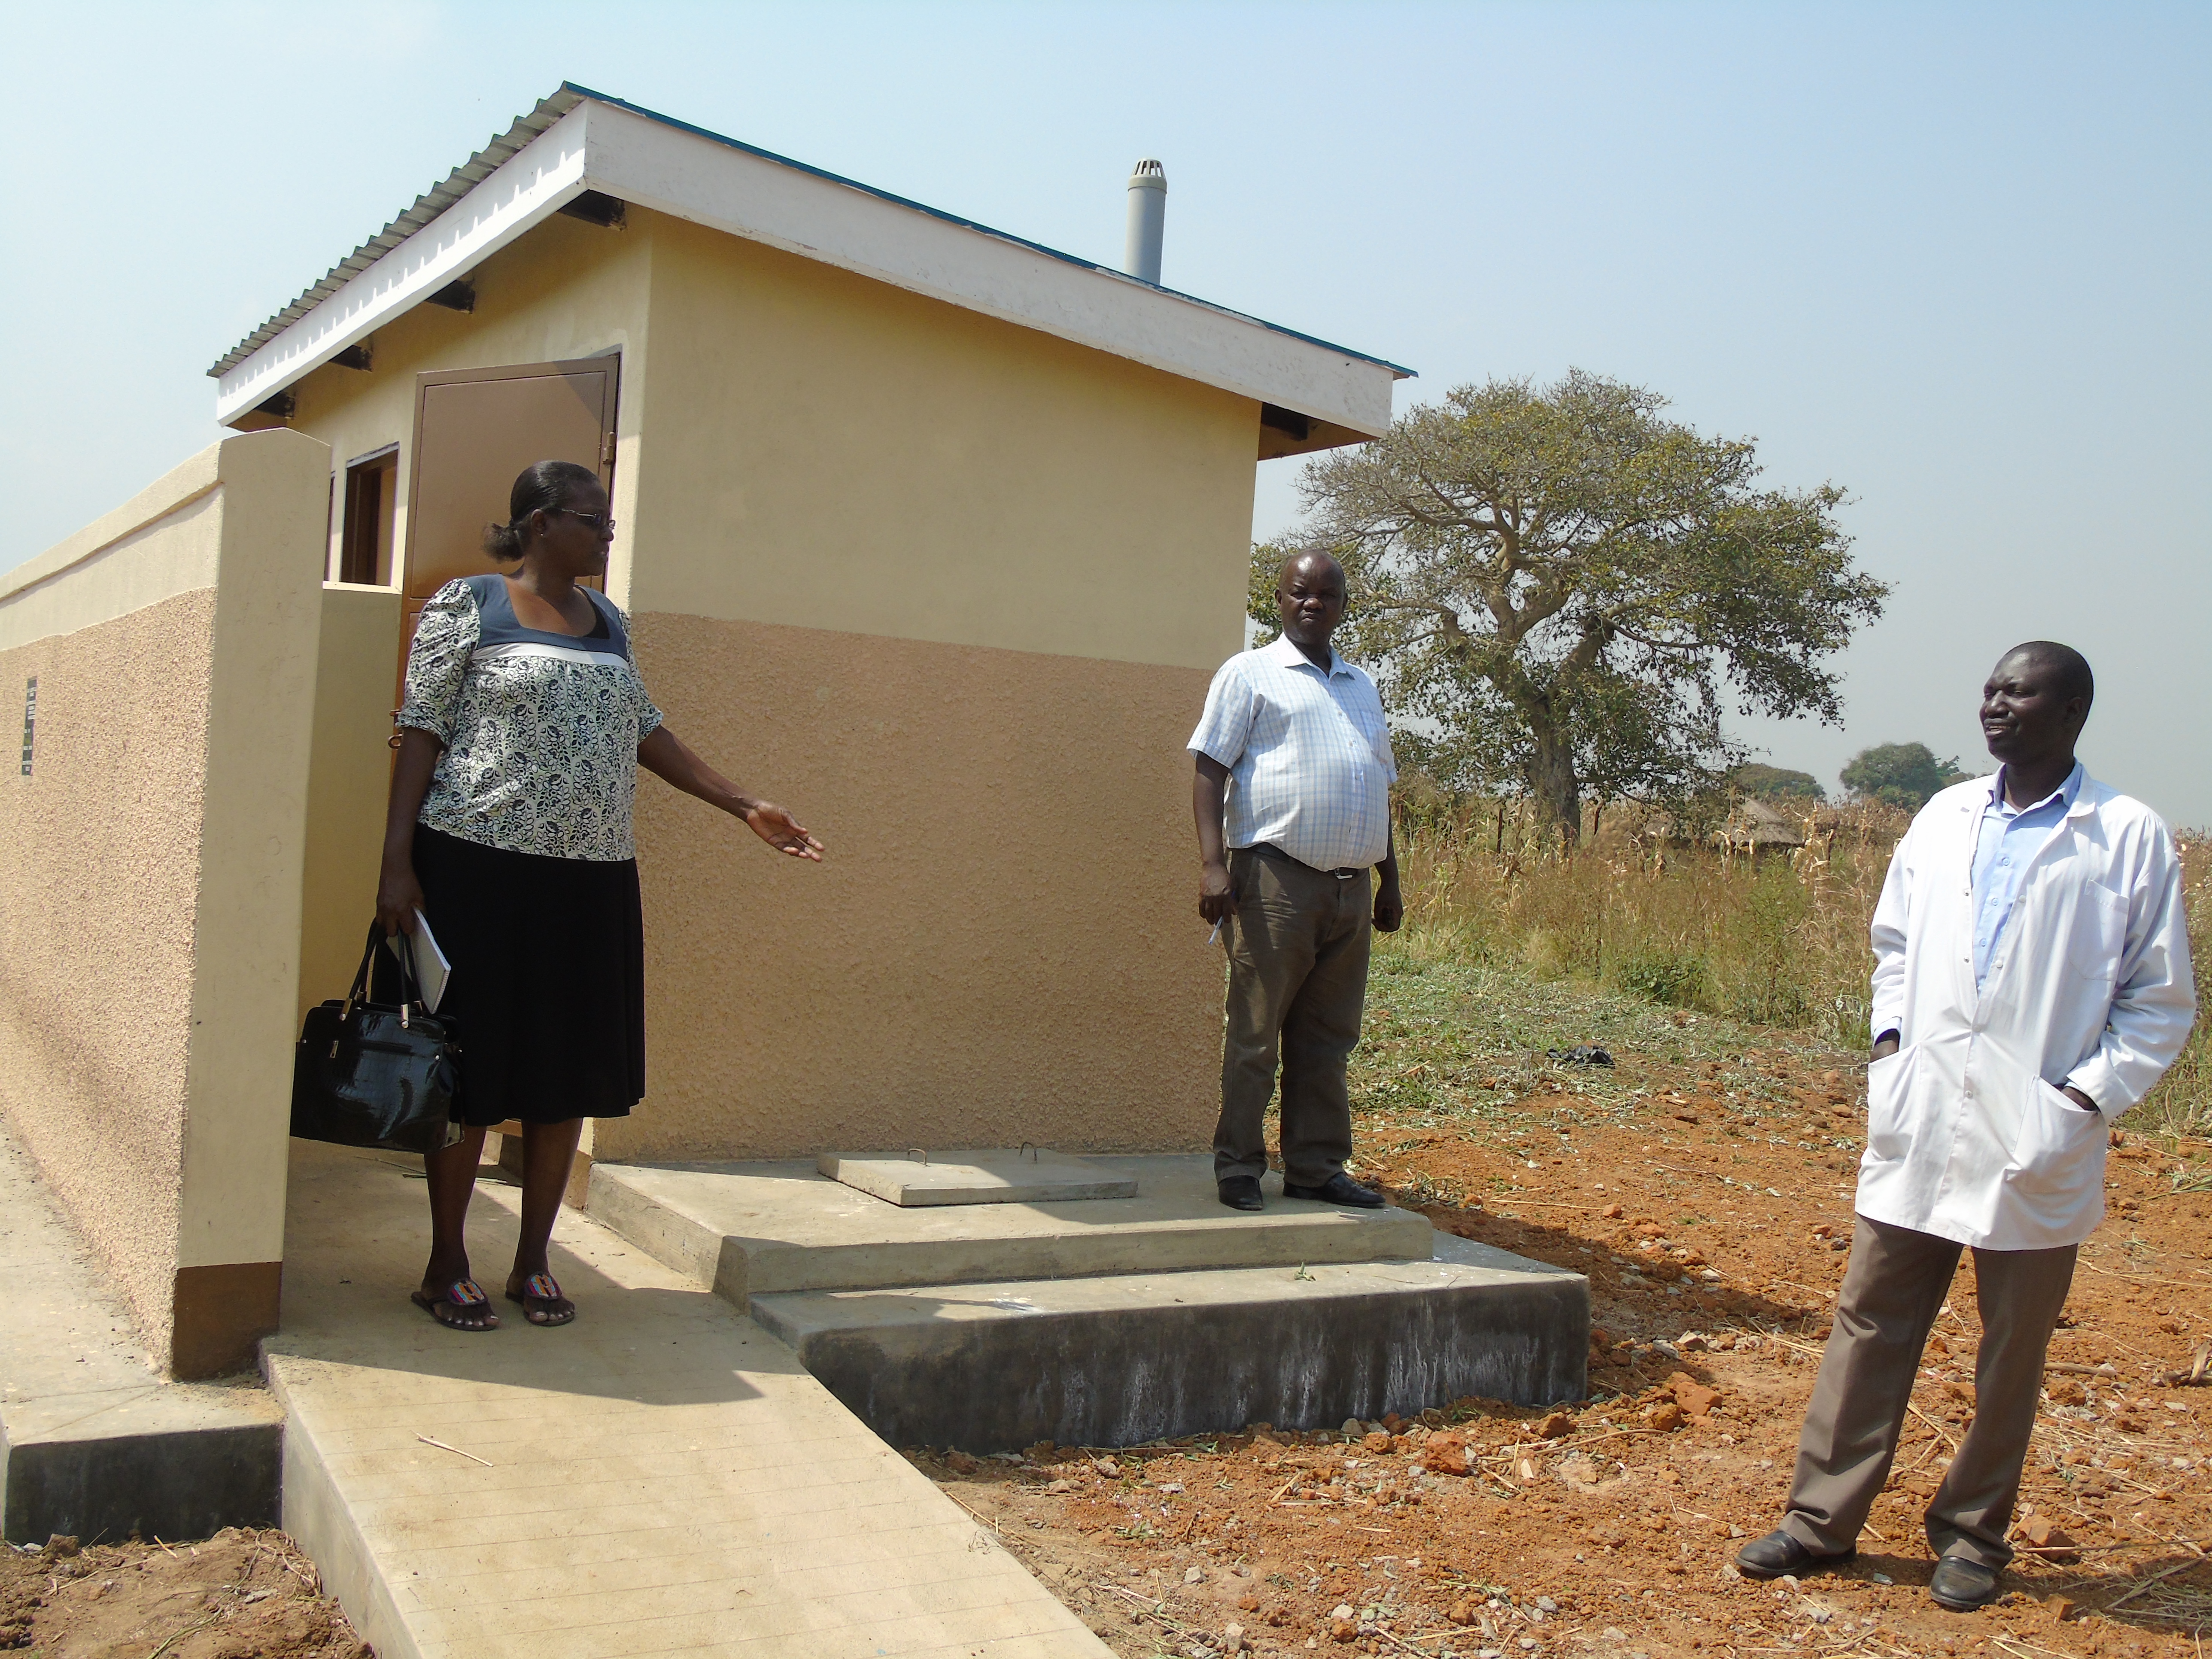 Gulu CAO inpects the New Latrine with the Incharge and the district Engineer